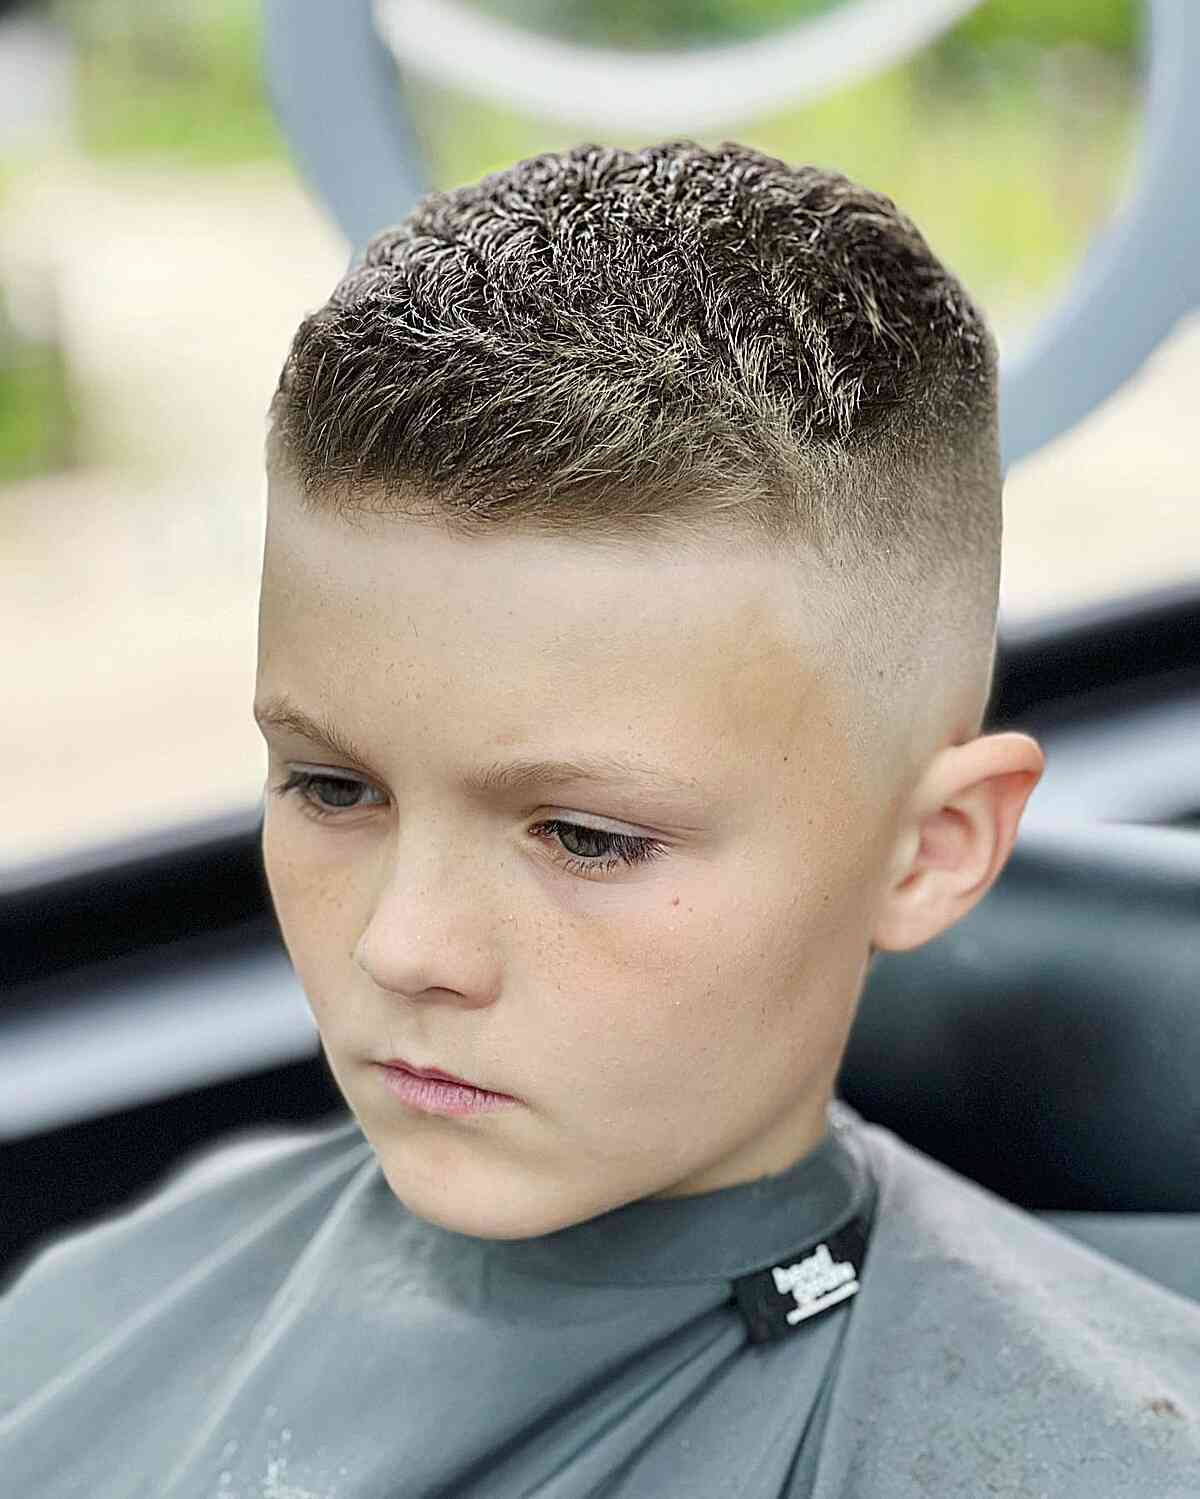 Boys' haircut: Picture of young boy rocking a punk